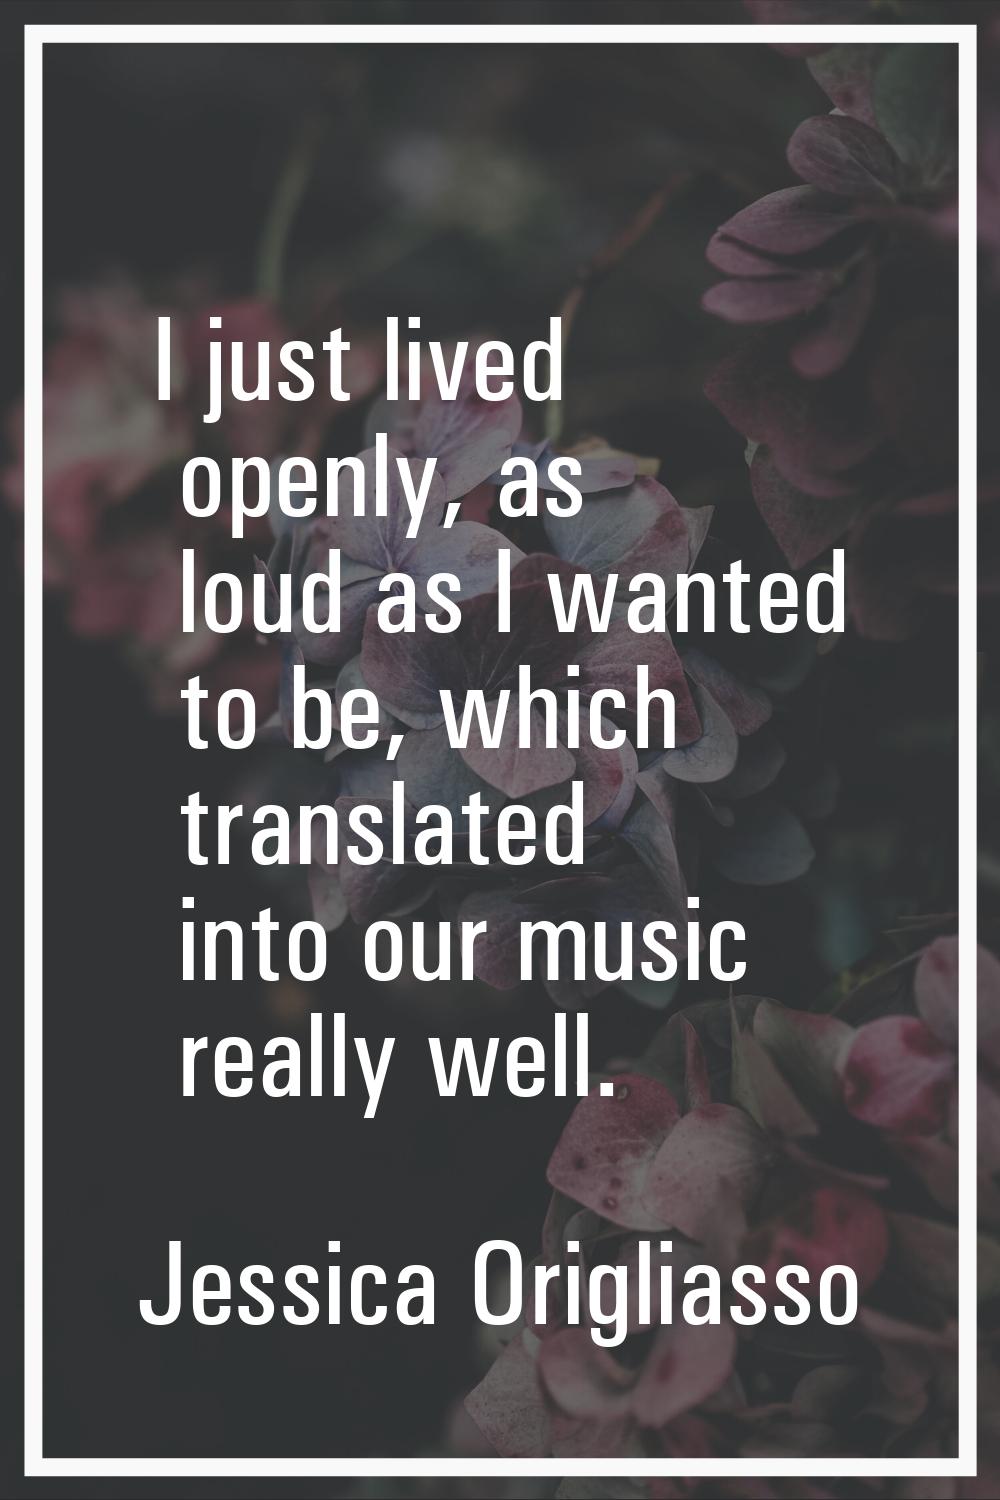 I just lived openly, as loud as I wanted to be, which translated into our music really well.